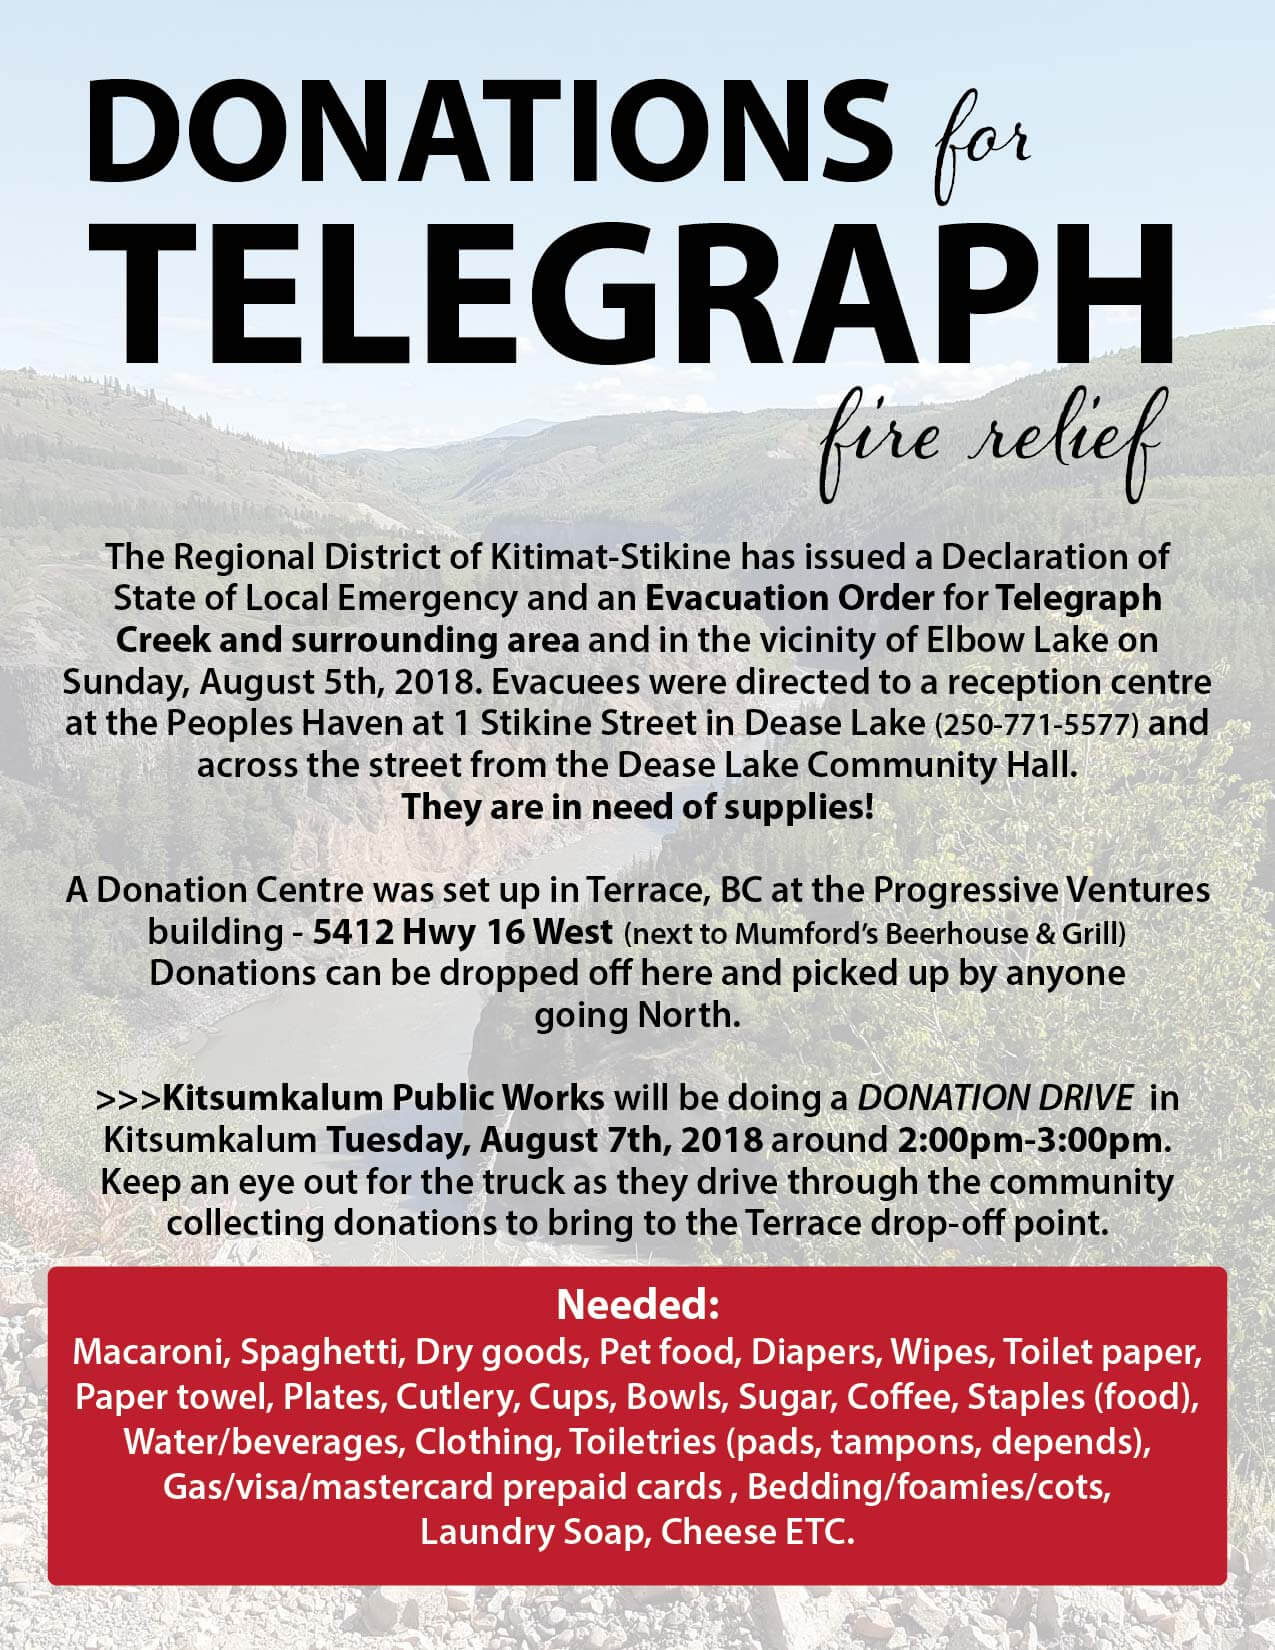 Donations Needed for Telegraph Fire Relief